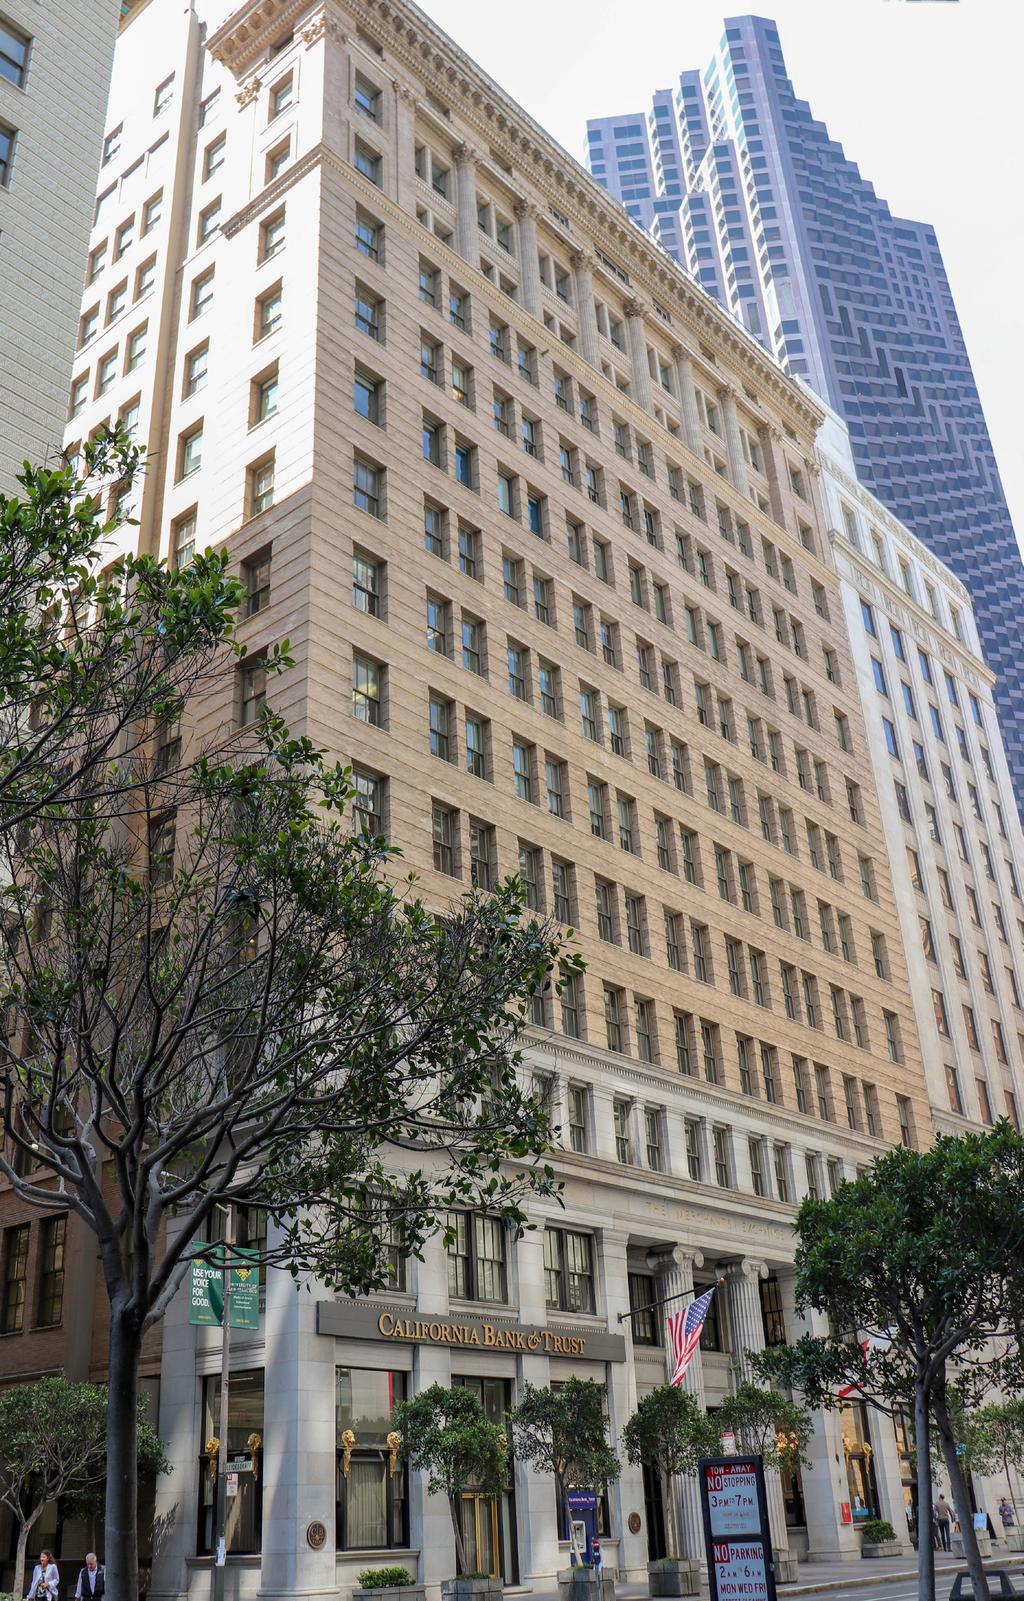 SA FRACISCO, CALIFORIA PROPRY OVRVIW he erchants xchange Building is an iconic building that has many features including a turn-of-the-century marble lobby and grand atrium, Julia organ Ballroom, one